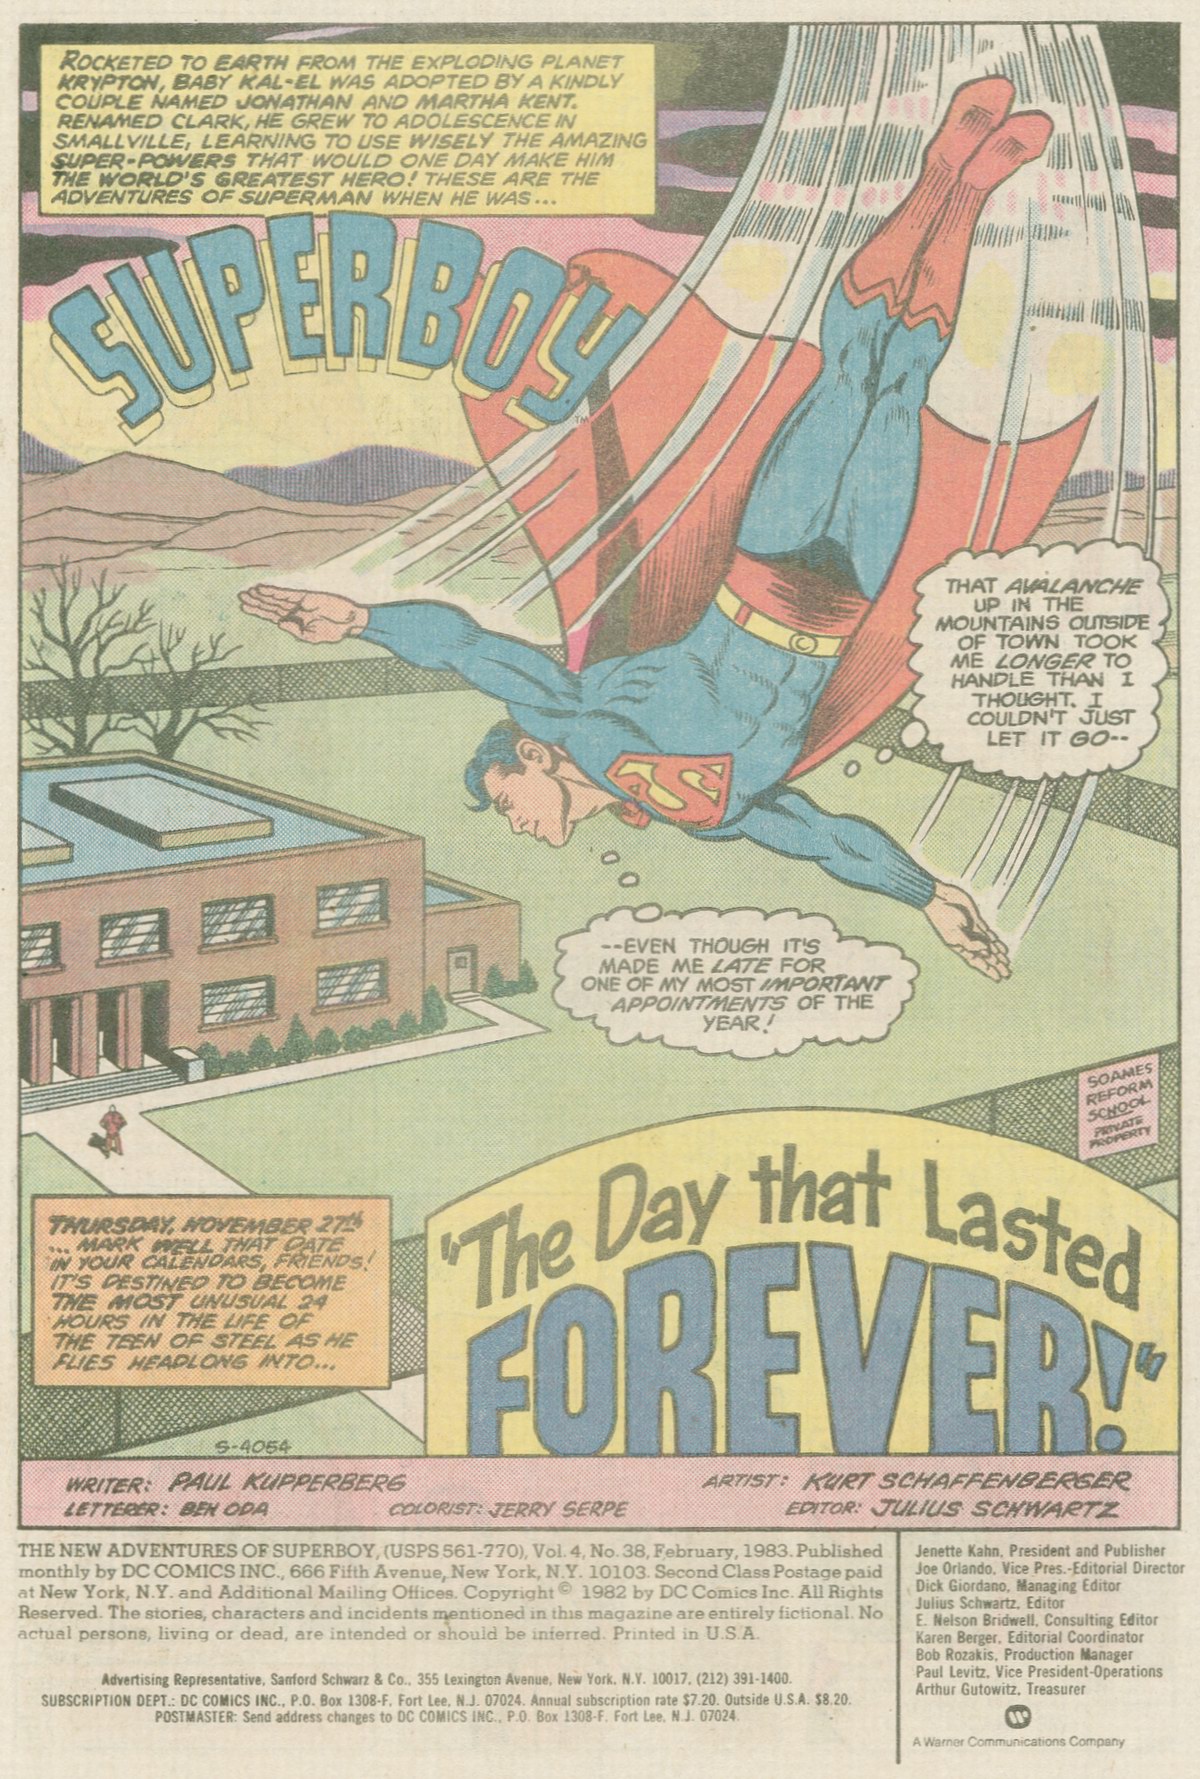 The New Adventures of Superboy 38 Page 1